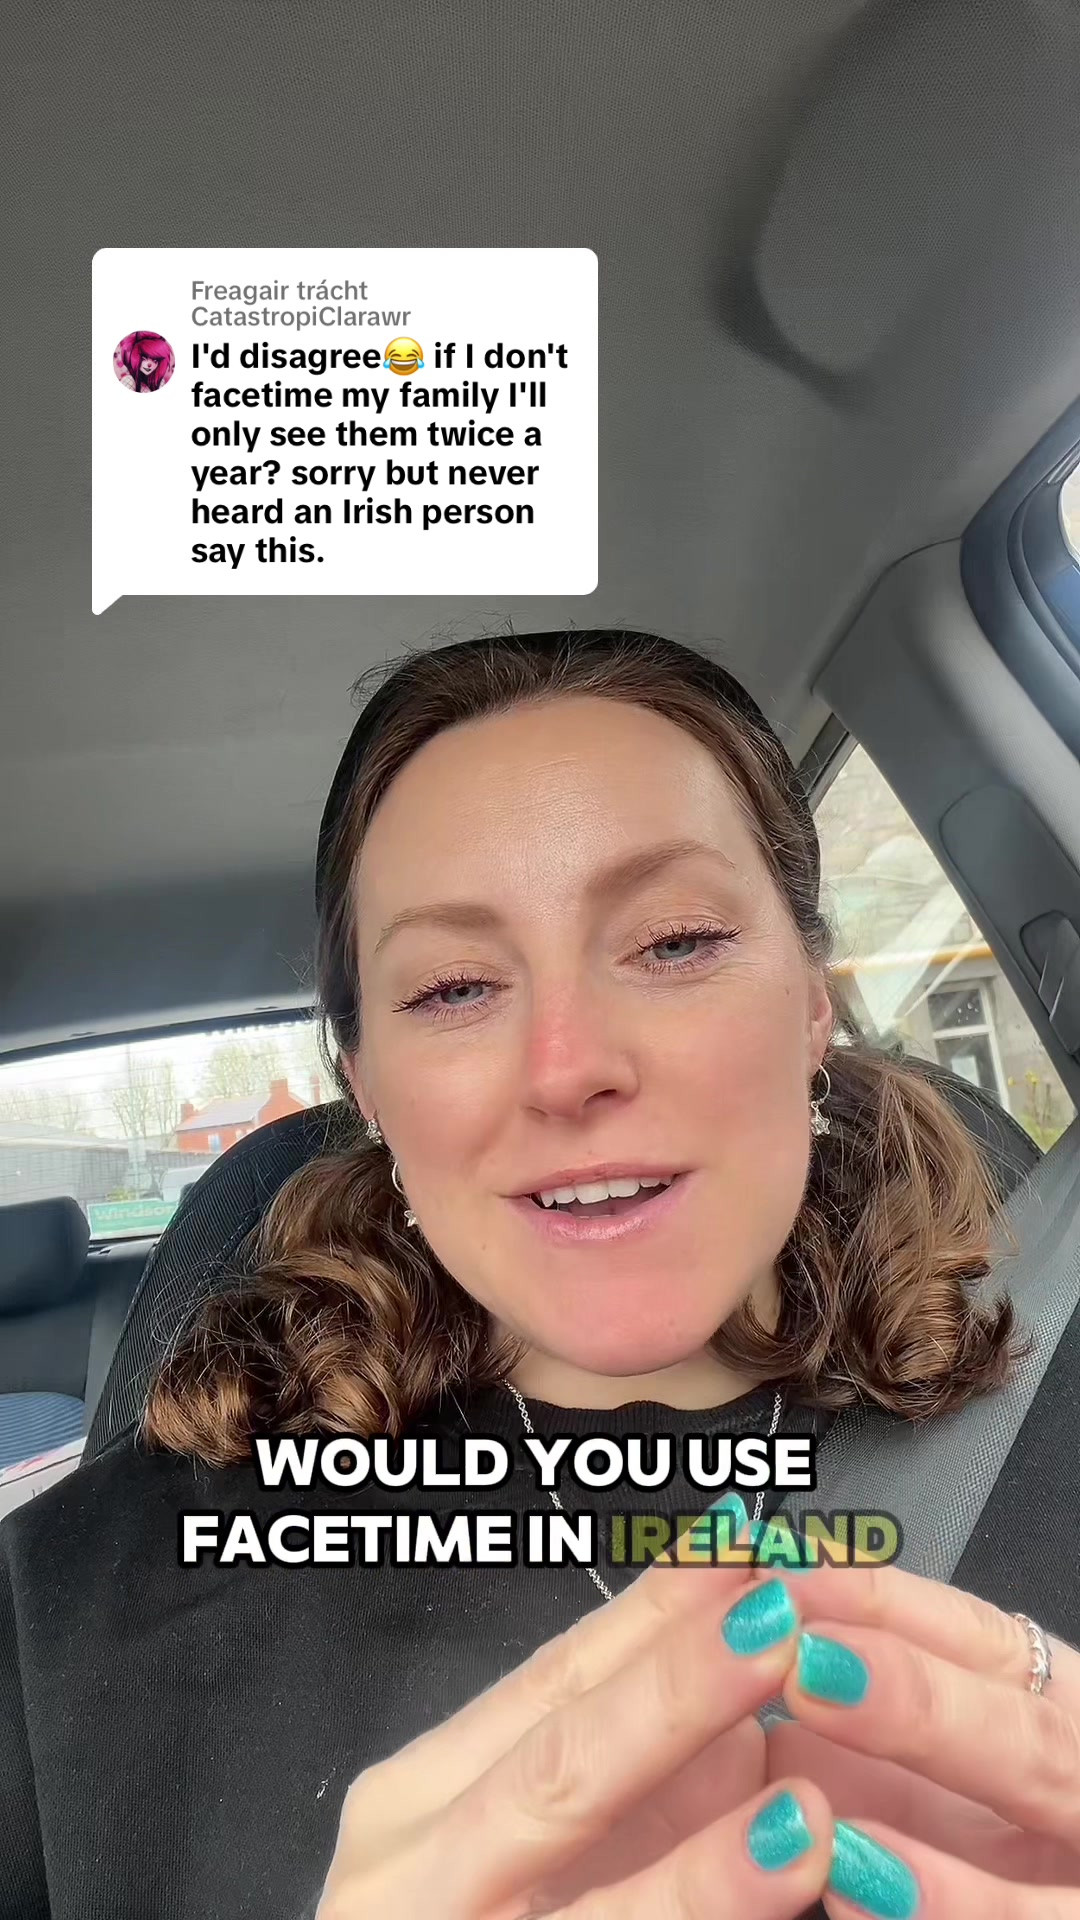 Ag freagairt @CatastropiClarawr let me know, if you’re Irish… would you use Facetime? And are you millenial or Gen Z? #fypireland #facetime #irishwish #replytocomments 